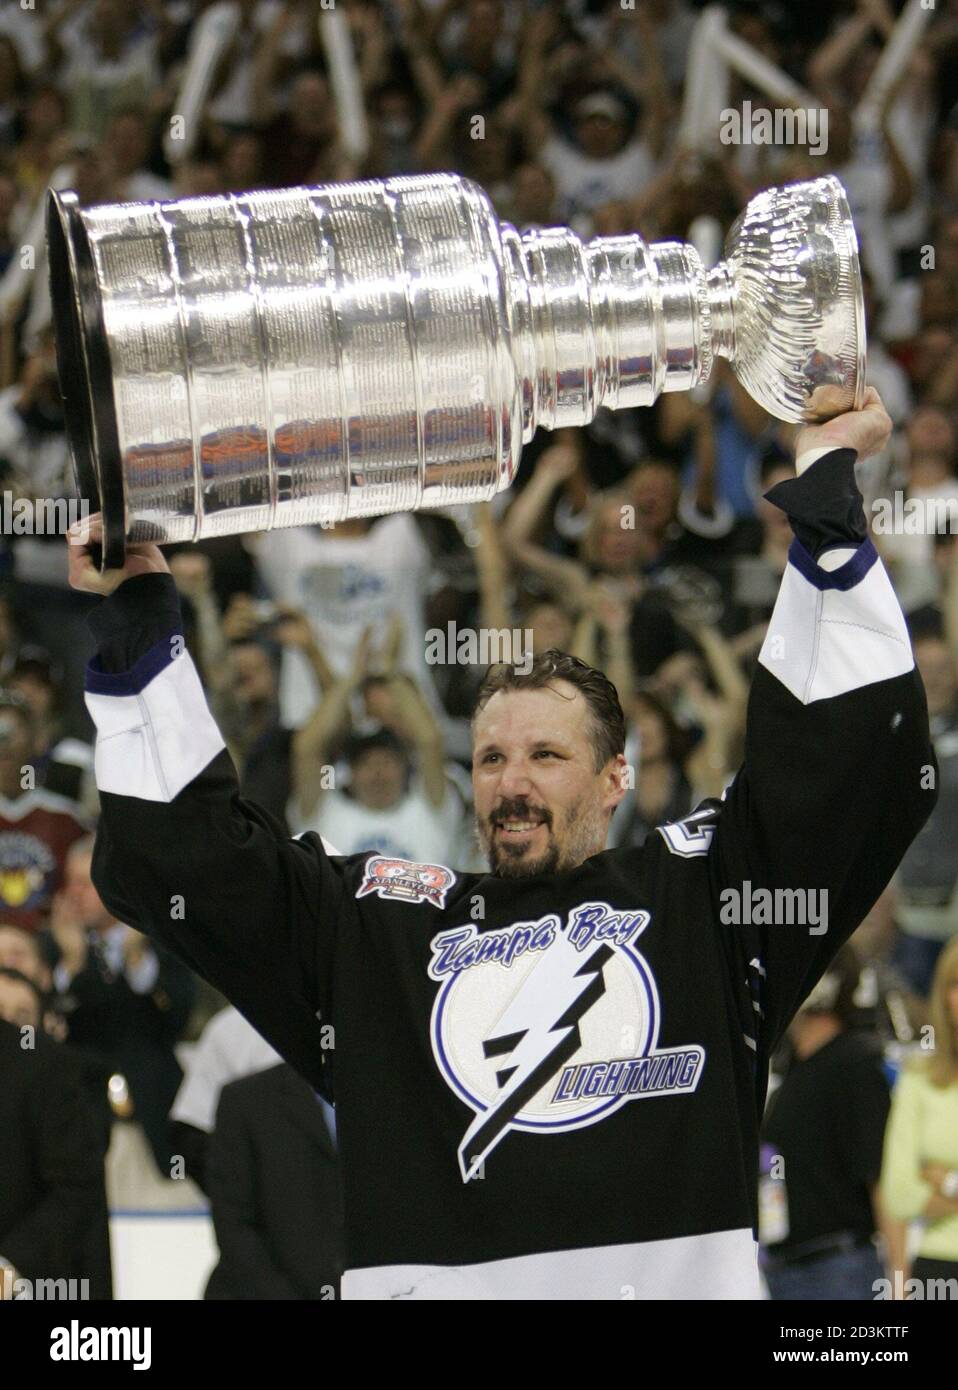 Tampa Bay Lightning captain Dave Andreychuk hoists the Stanley Cup after  they defeated the Calgary Flames 2-1 to win the NHL championship in Tampa  June 7, 2004. REUTERS/Shaun Best PJ Stock Photo - Alamy